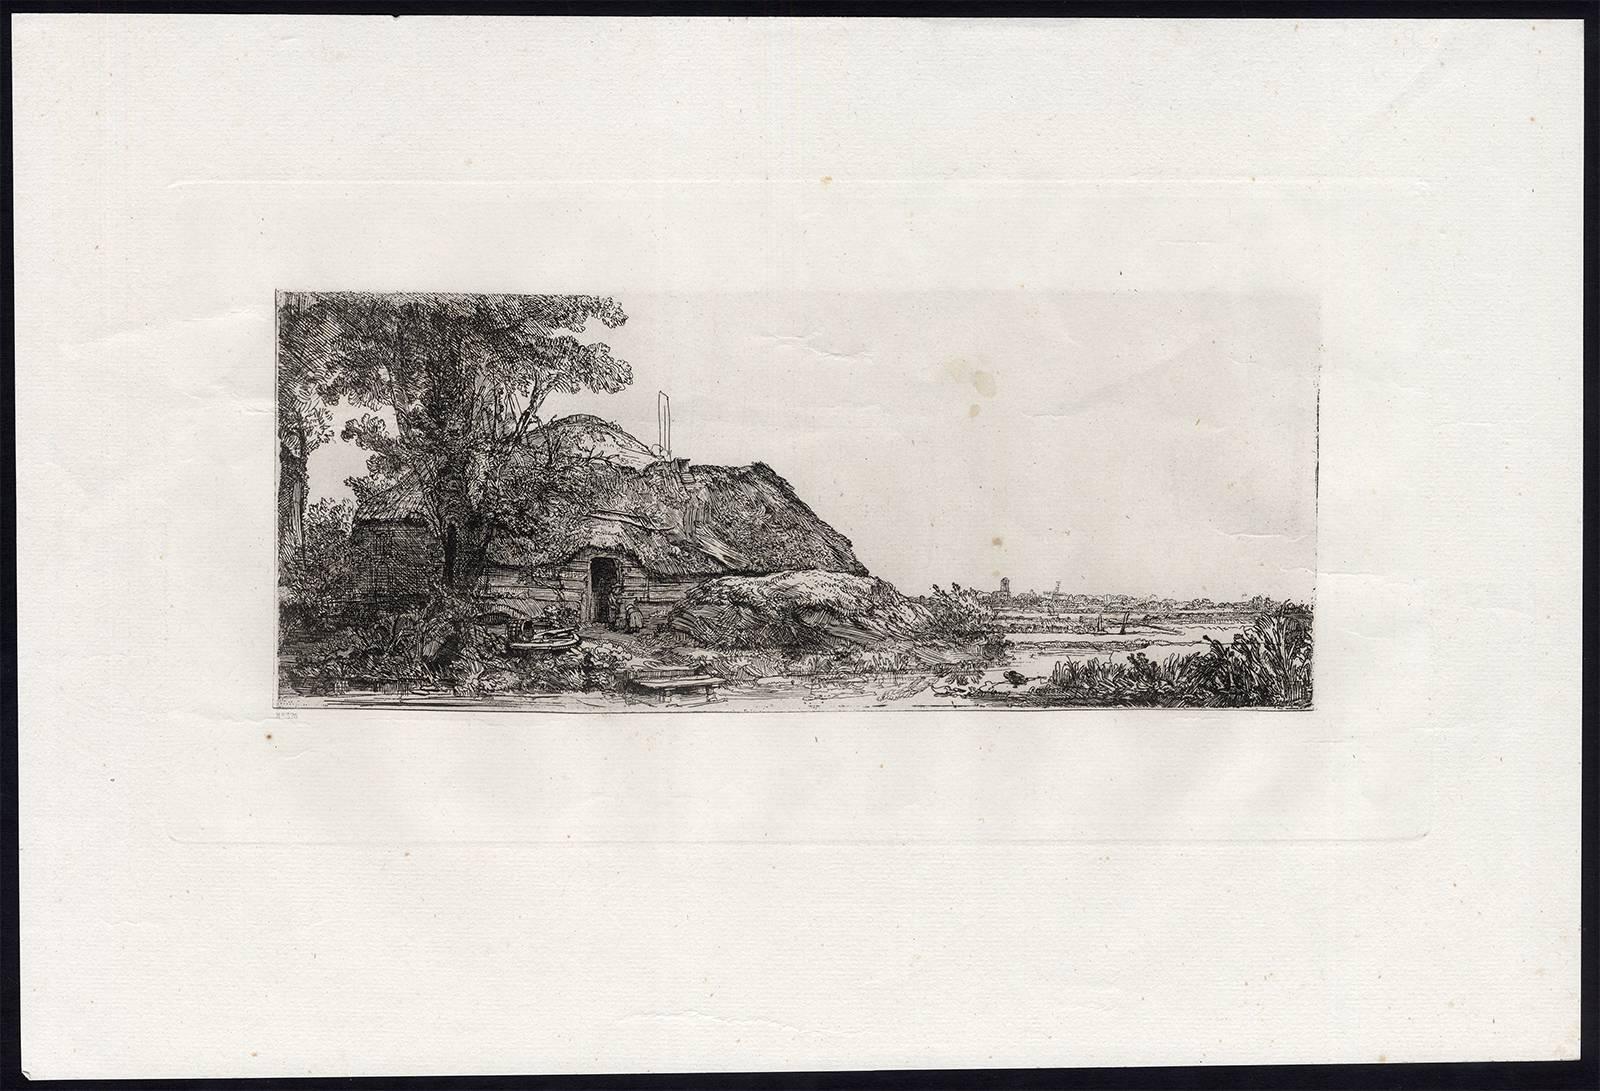 M. Charreyre Landscape Print - Untitled - This plate shows a landscape with farm [...].